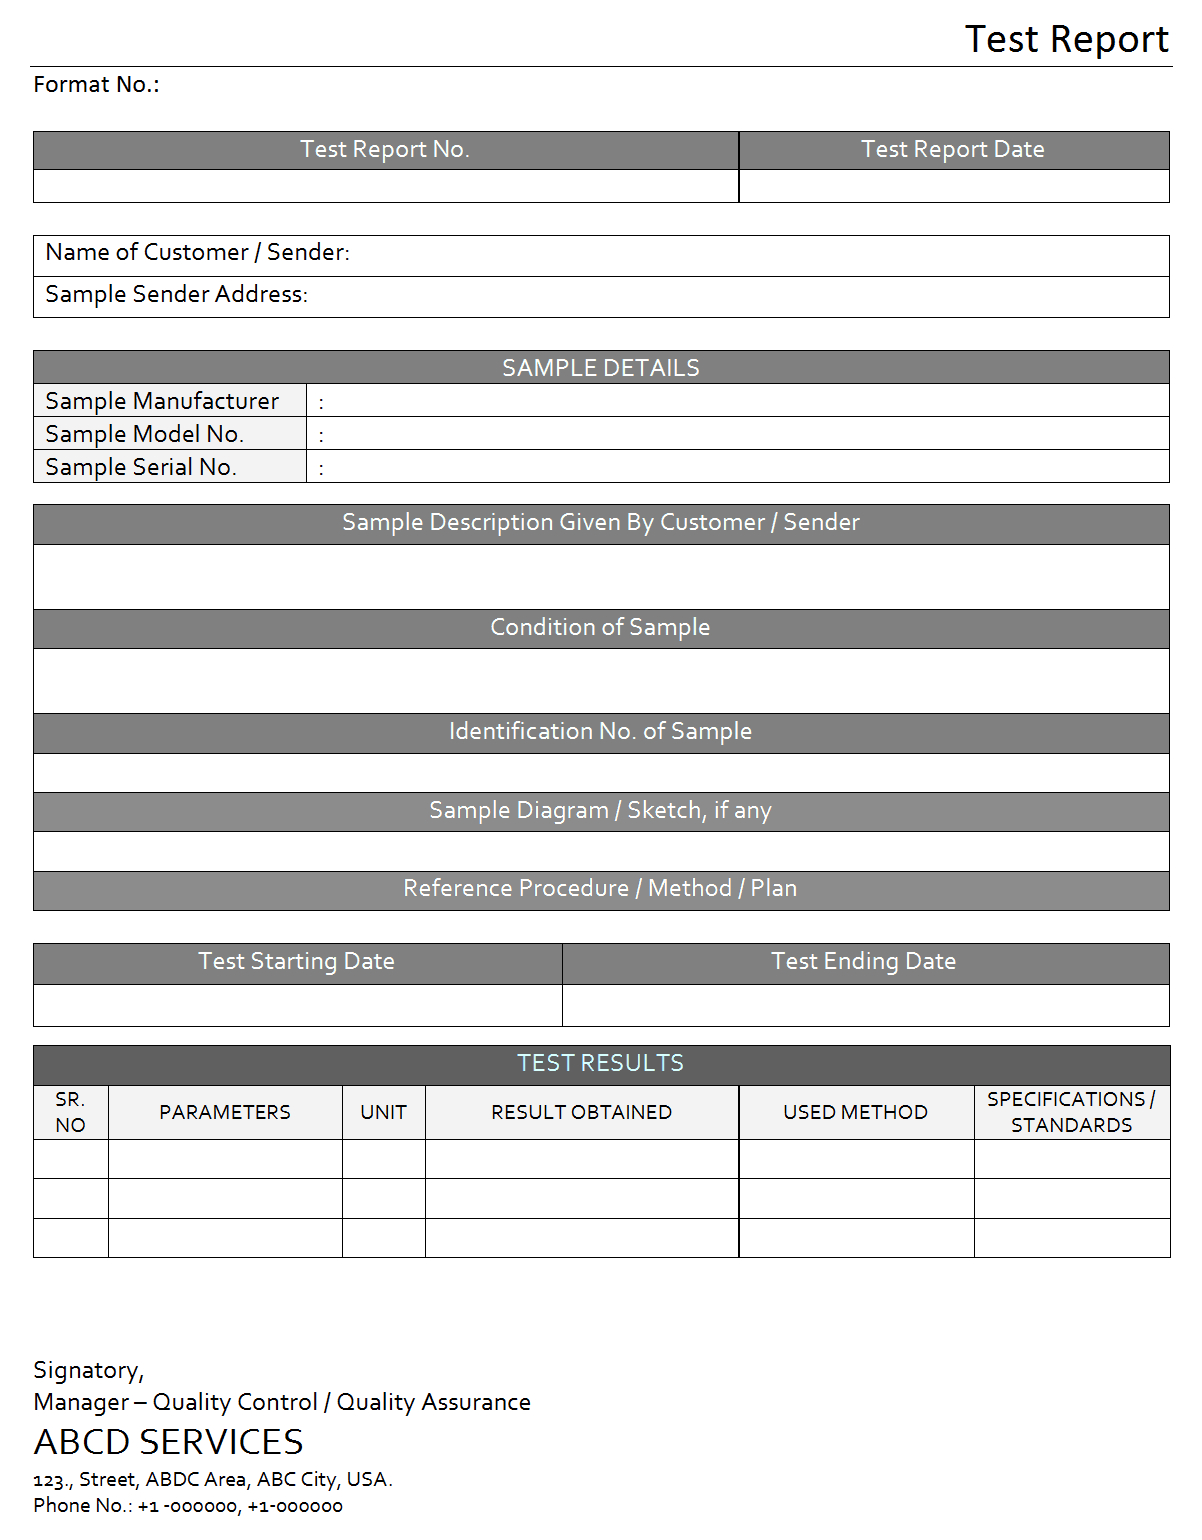 Test Report Template Excel ] – Templates Continuous Within Wppsi Iv Report Template